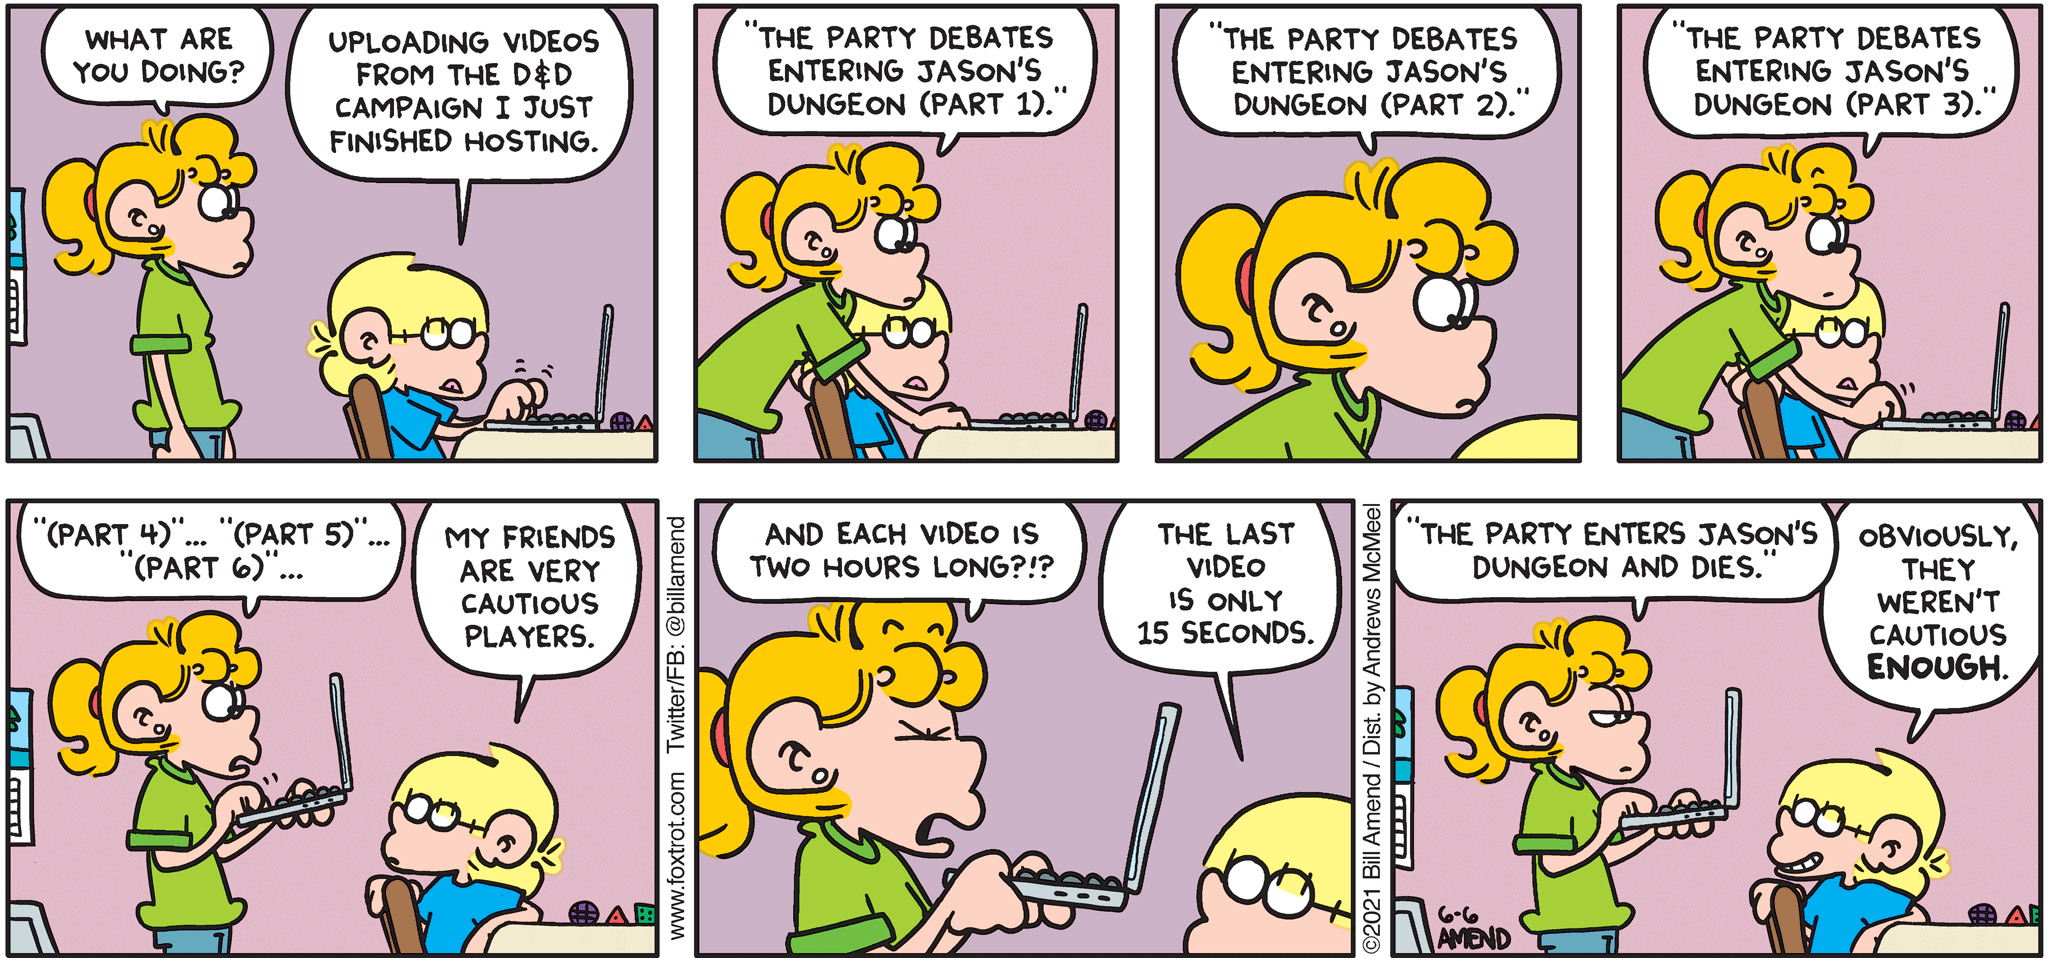 FoxTrot comic strip by Bill Amend - "Caution Is Warranted" published June 6, 2021 - Paige Fox: What are you doing? Jason Fox: Uploading videos from the D&D campaign I just finished hosting. Paige Fox: "The party debates entering Jason's dungeons (Part 1)." Paige Fox: "The party debates entering Jason's dungeon (Part 2)." "The party debates entering Jason's dungeon (Part 3)." "(Part 4)" ... "(Part 5)" ... "(Part 6)" ... Jason Fox: My friends are very cautious players. Paige Fox: And each video is two hours long?!? Jason Fox: The last video is only 15 seconds. Jason Fox: "The party enters Jason's dungeon and dies." Jason Fox: Obviously they weren't cautious ENOUGH.